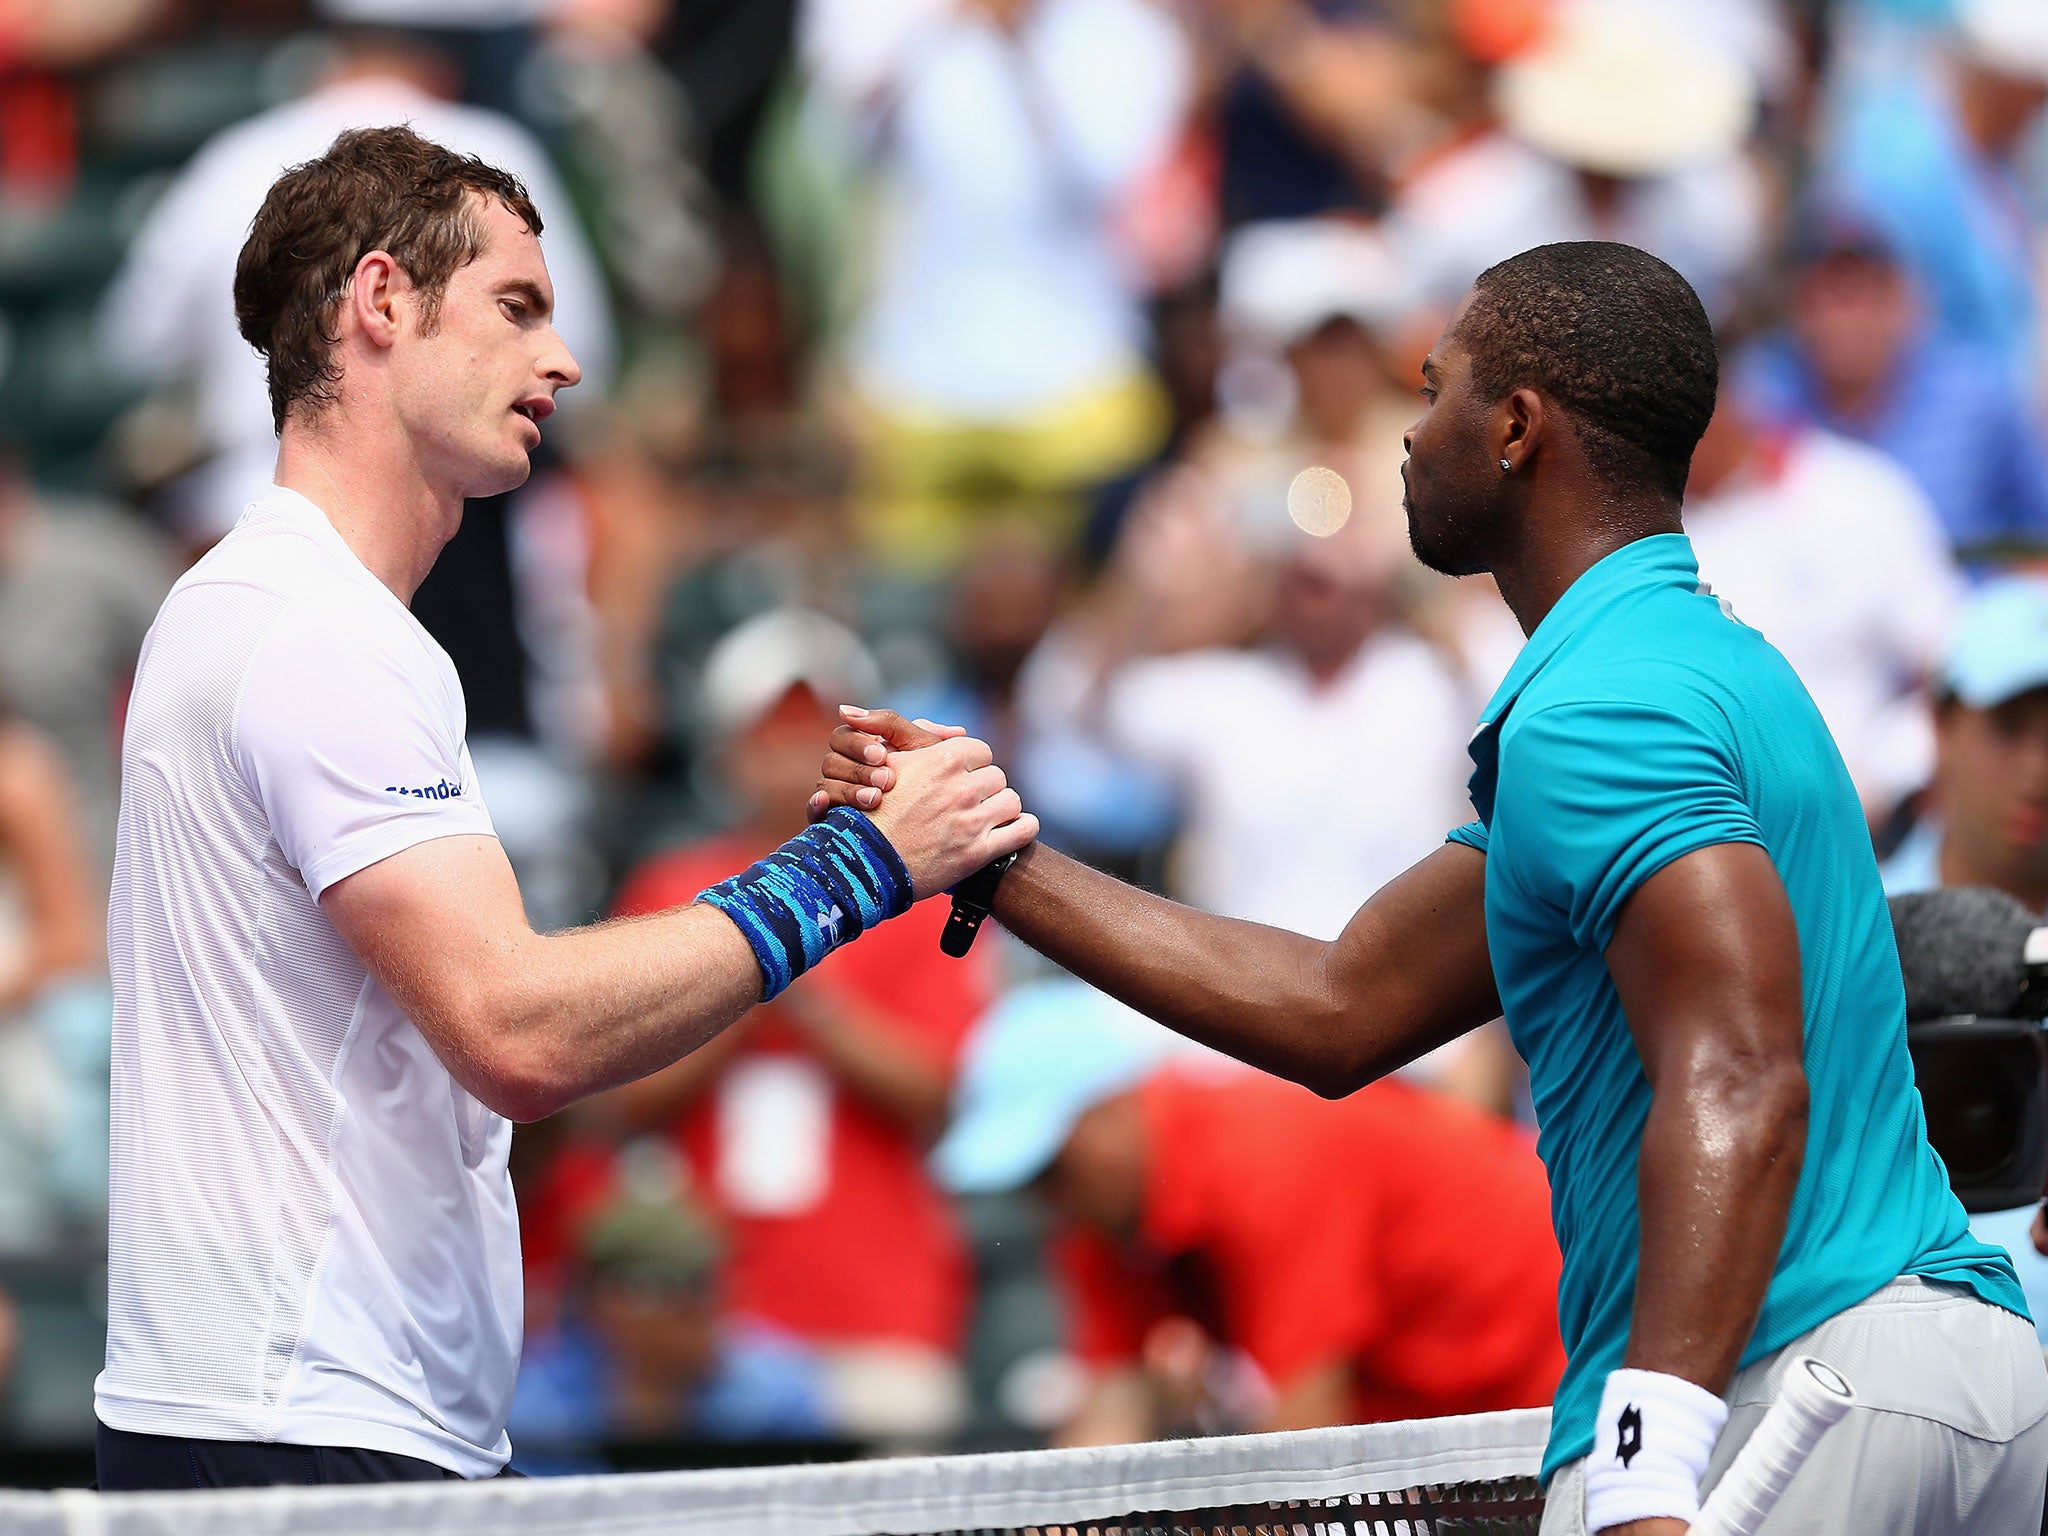 Murray needed just 82 minutes to beat the 25-year-old American